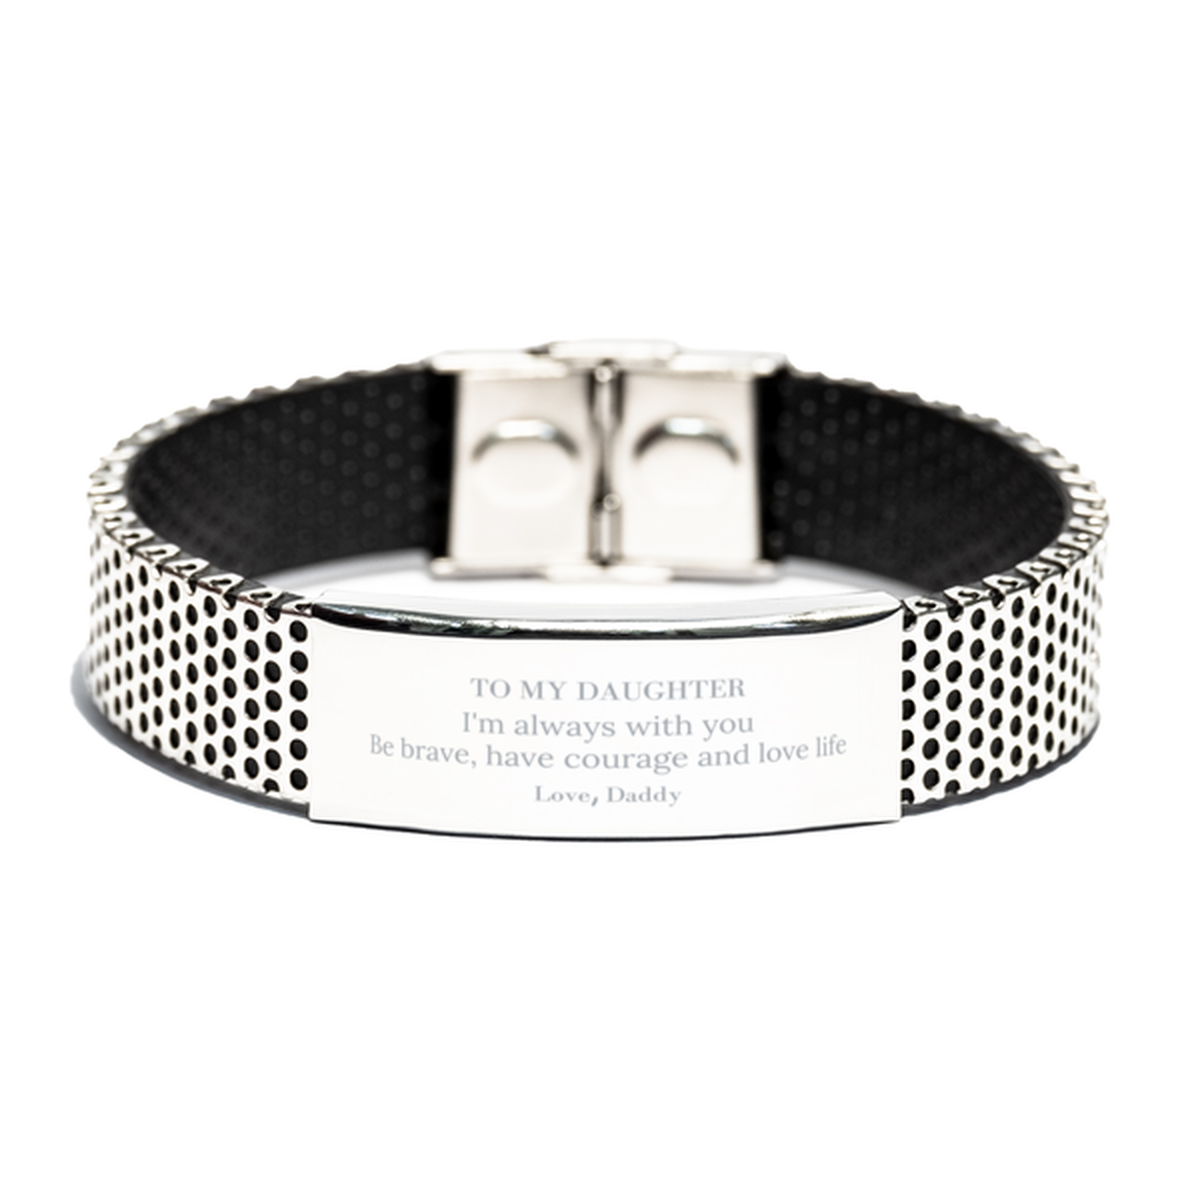 To My Daughter Gifts from Daddy, Unique Stainless Steel Bracelet Inspirational Christmas Birthday Graduation Gifts for Daughter I'm always with you. Be brave, have courage and love life. Love, Daddy